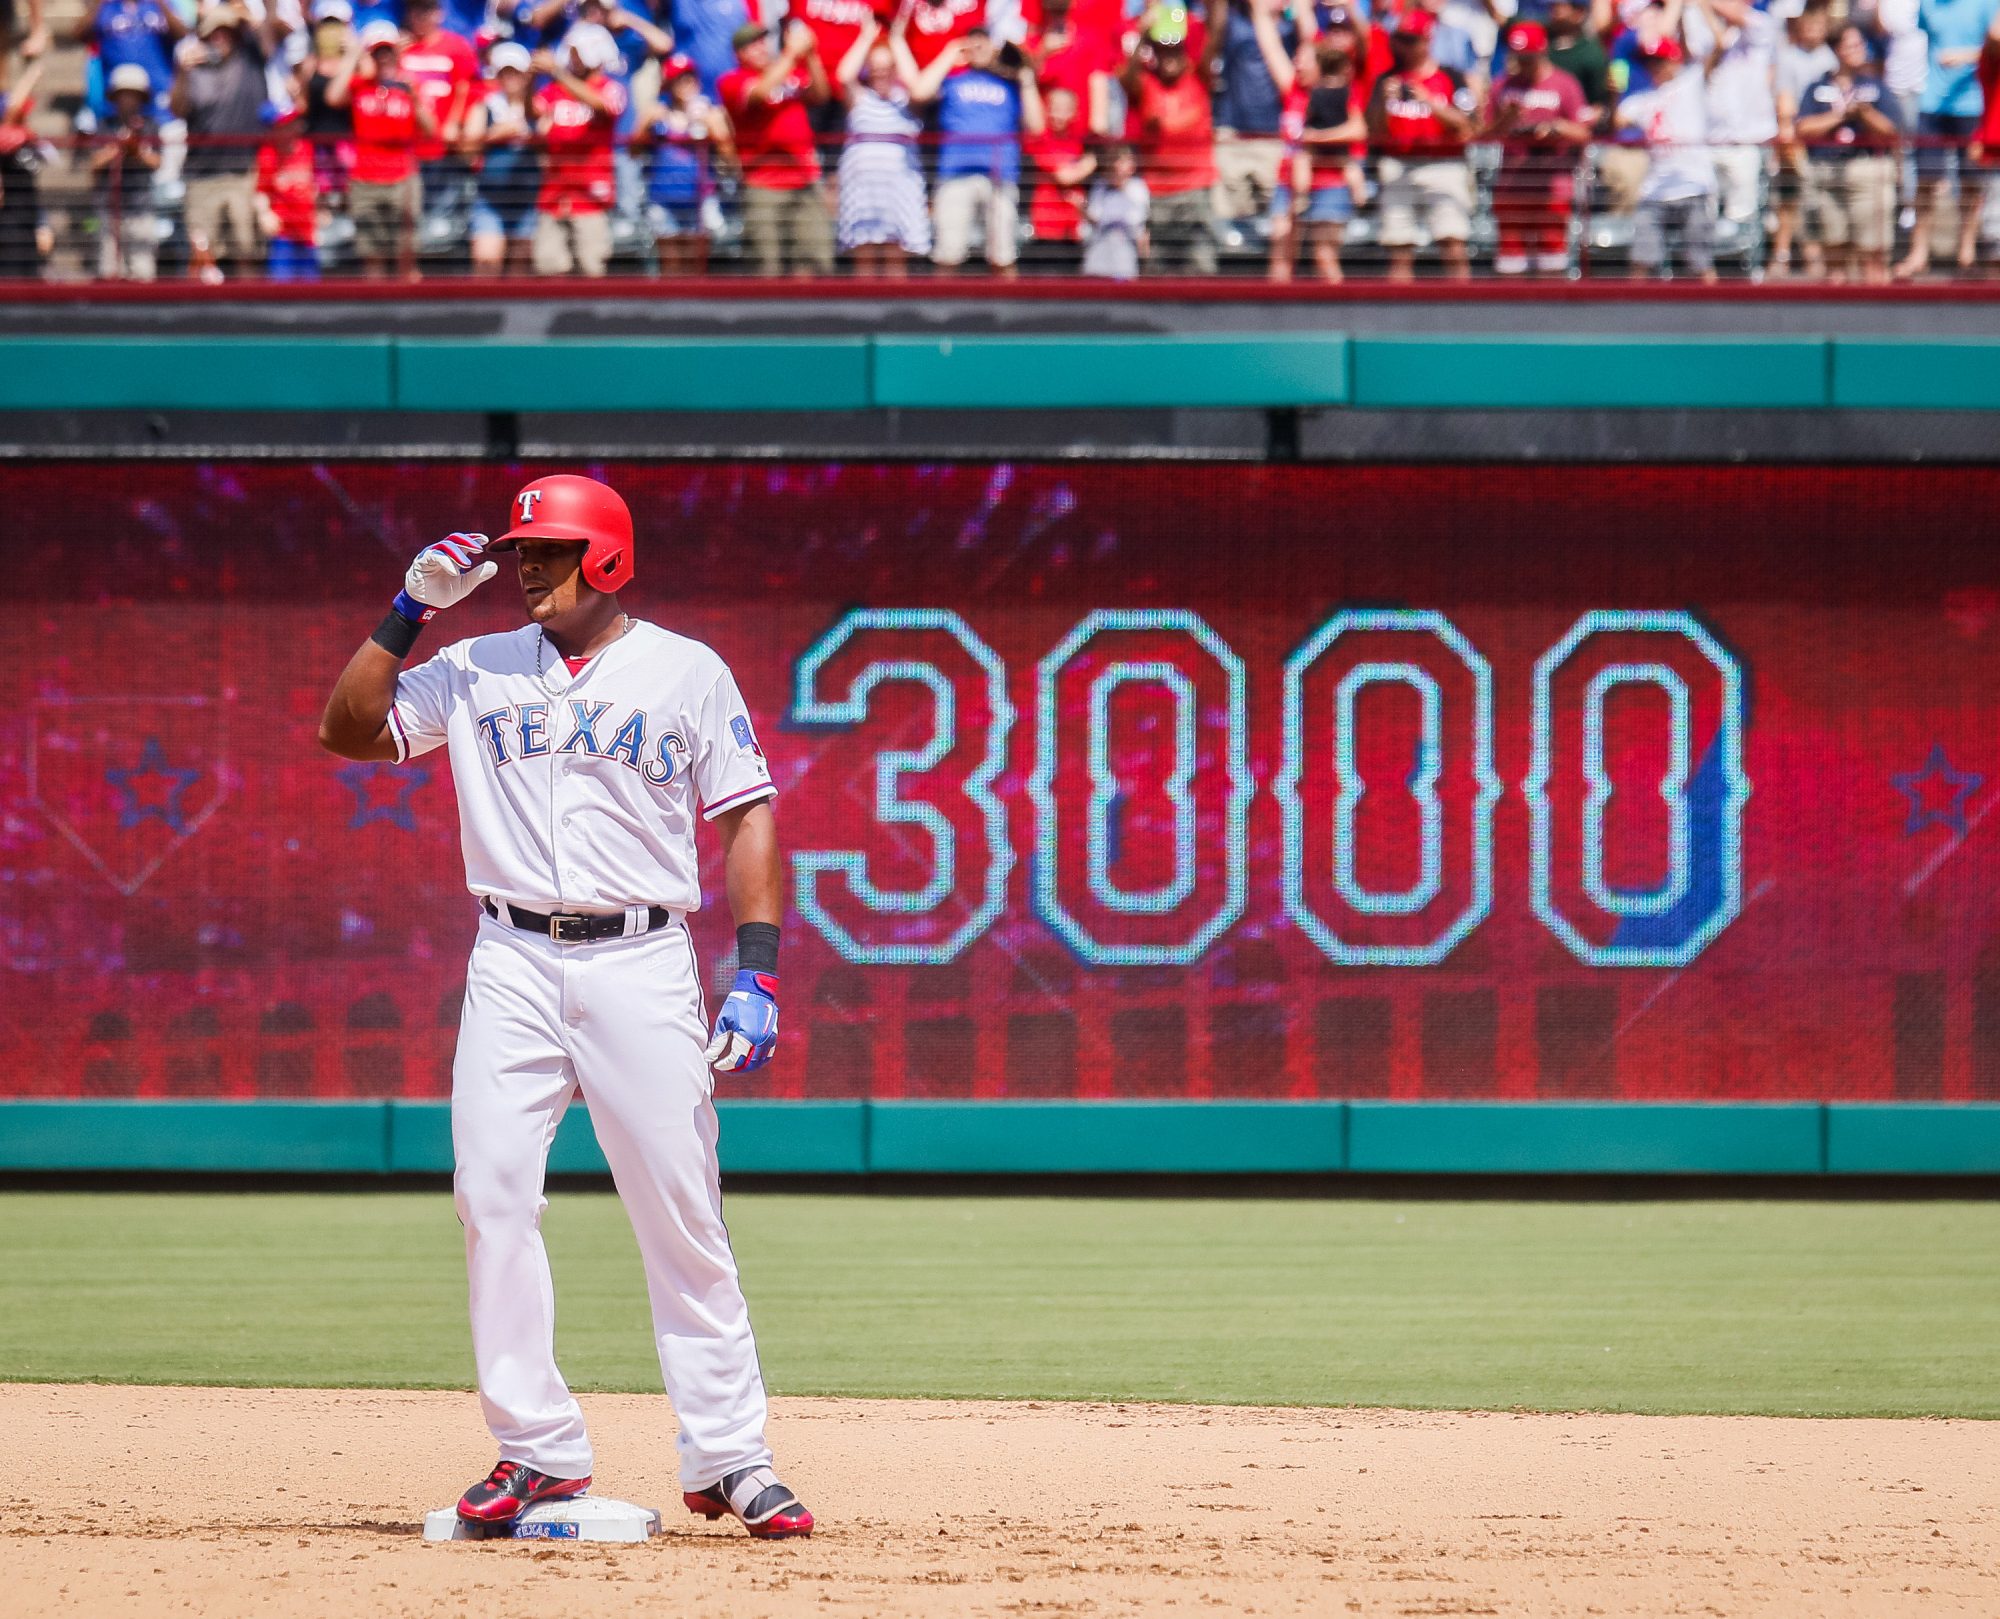 Adrian Beltre Records 3,000th Hit (Video) 